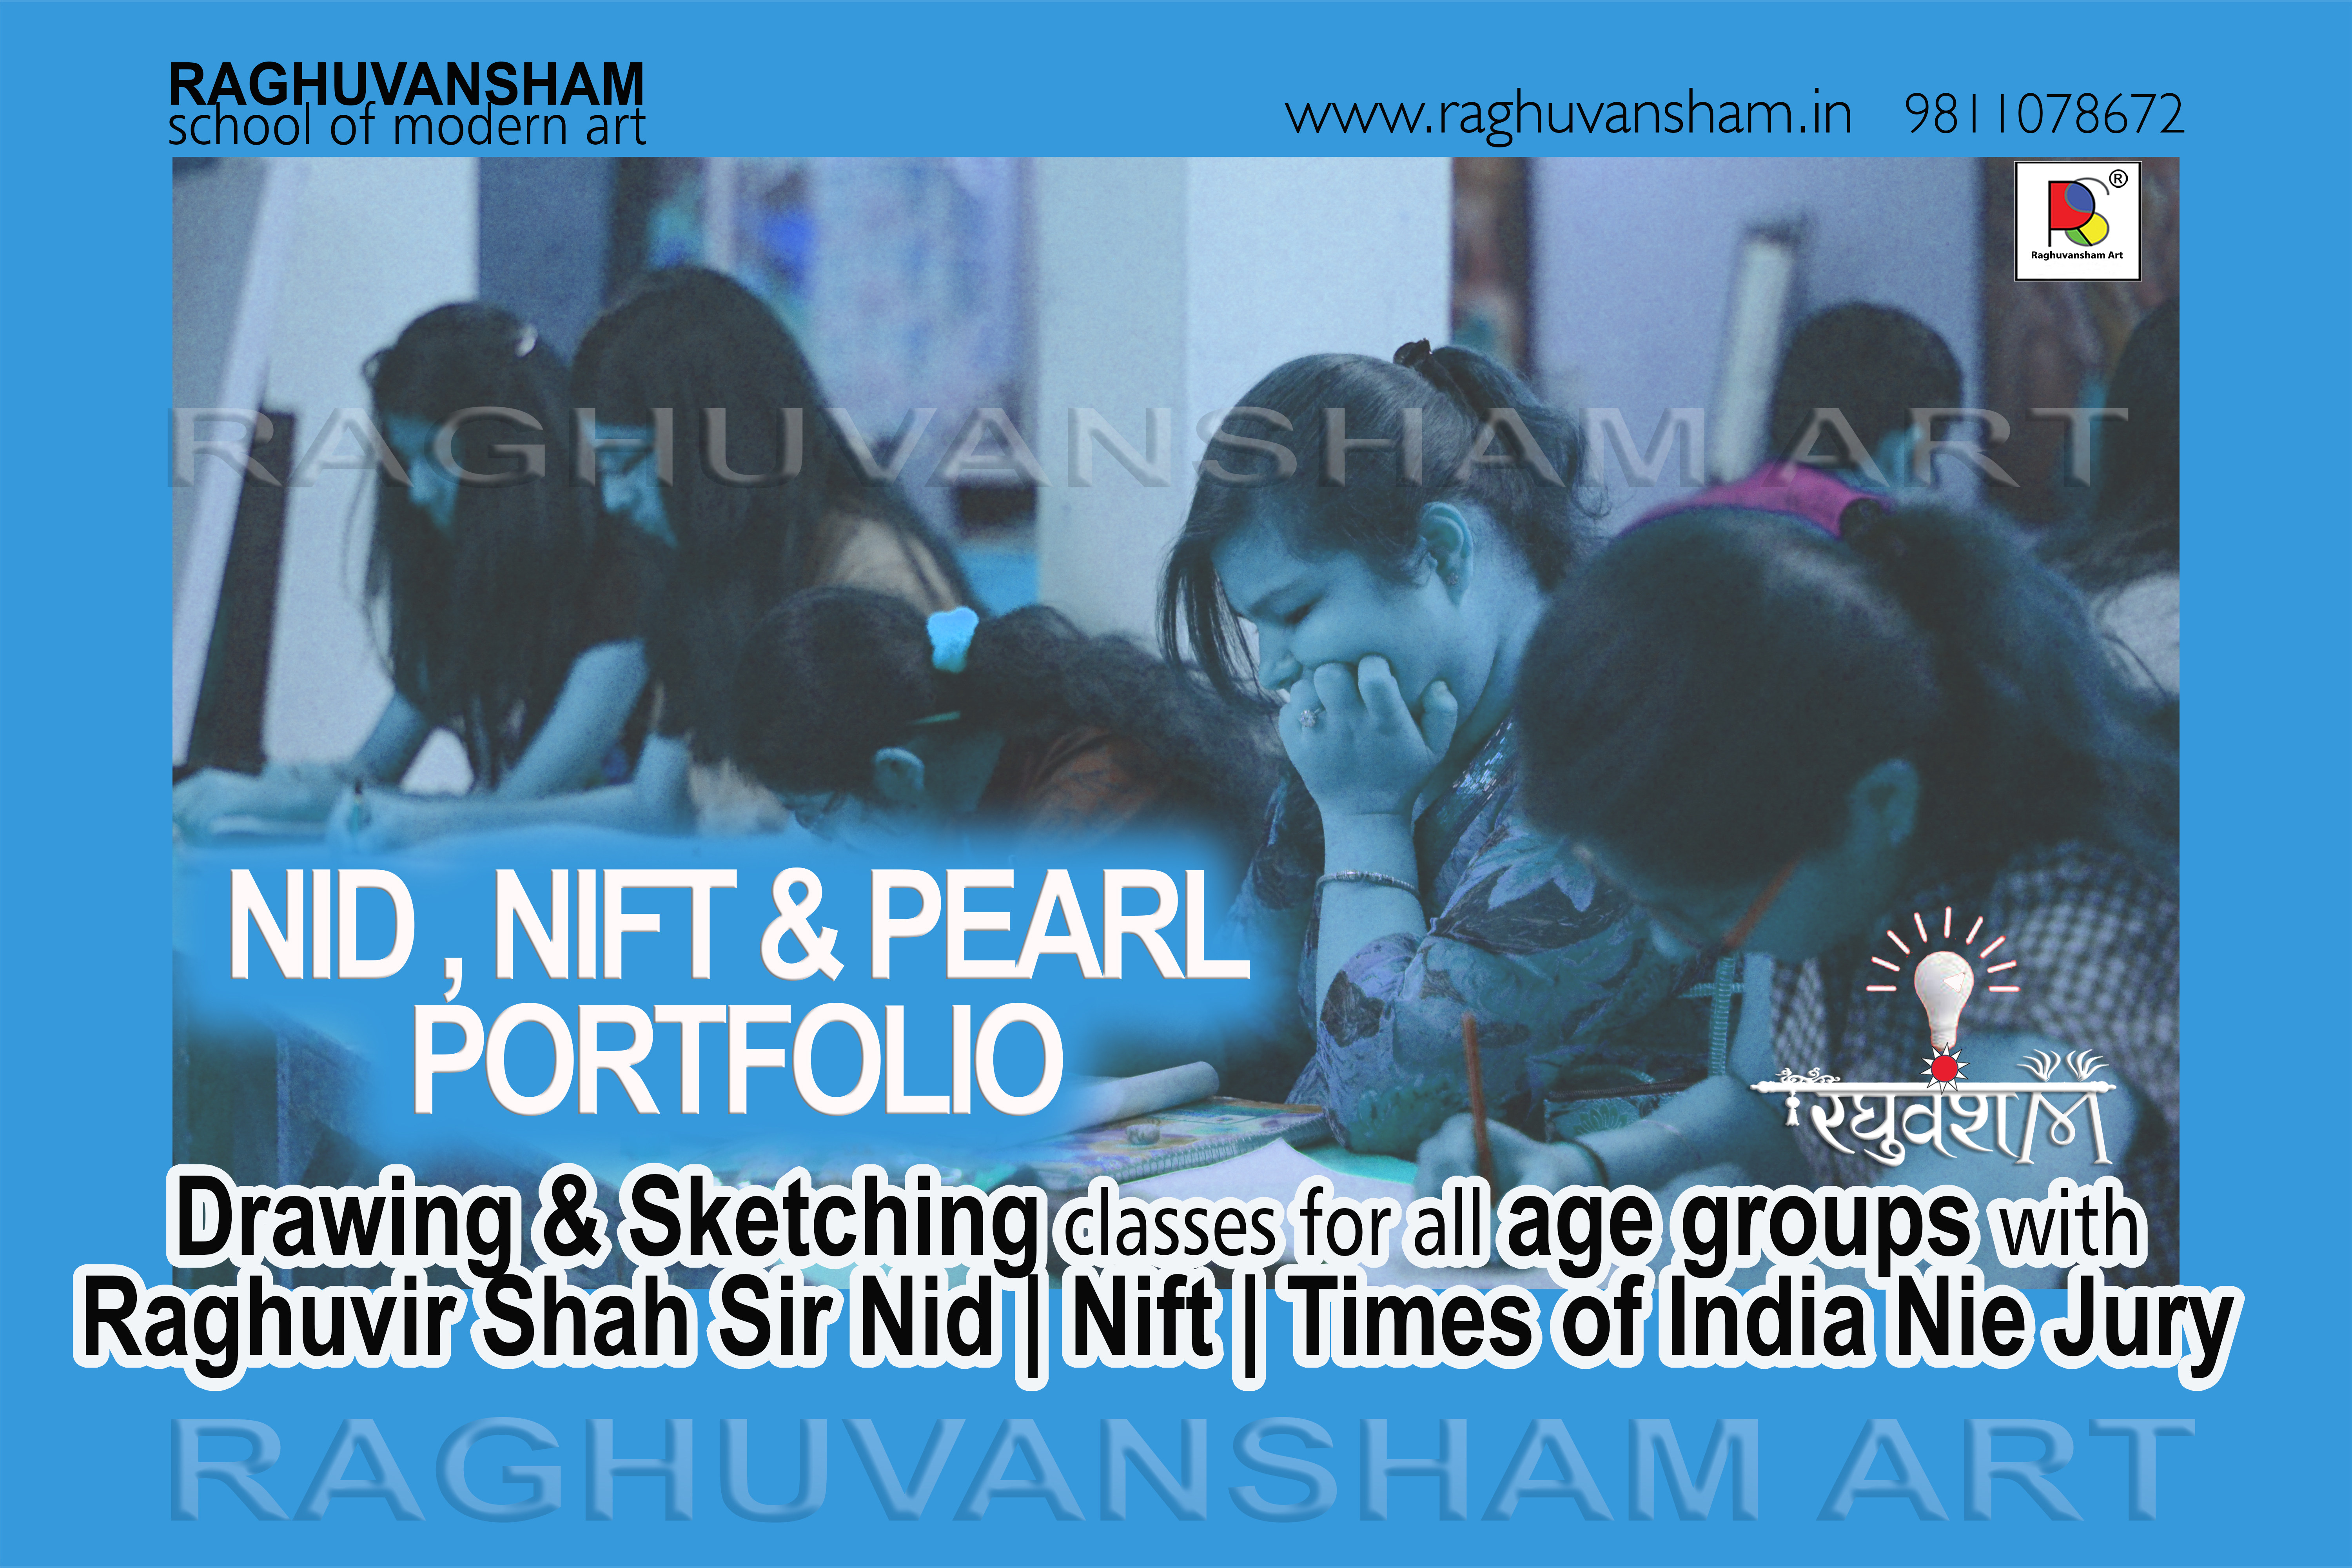 Drawing and sketching classes for all age groups with RAGHUVIR SHAH SIR NIDNIFT Times of india NIE Jury. delhi punjabi baghEducation and LearningCoaching ClassesWest DelhiPunjabi Bagh